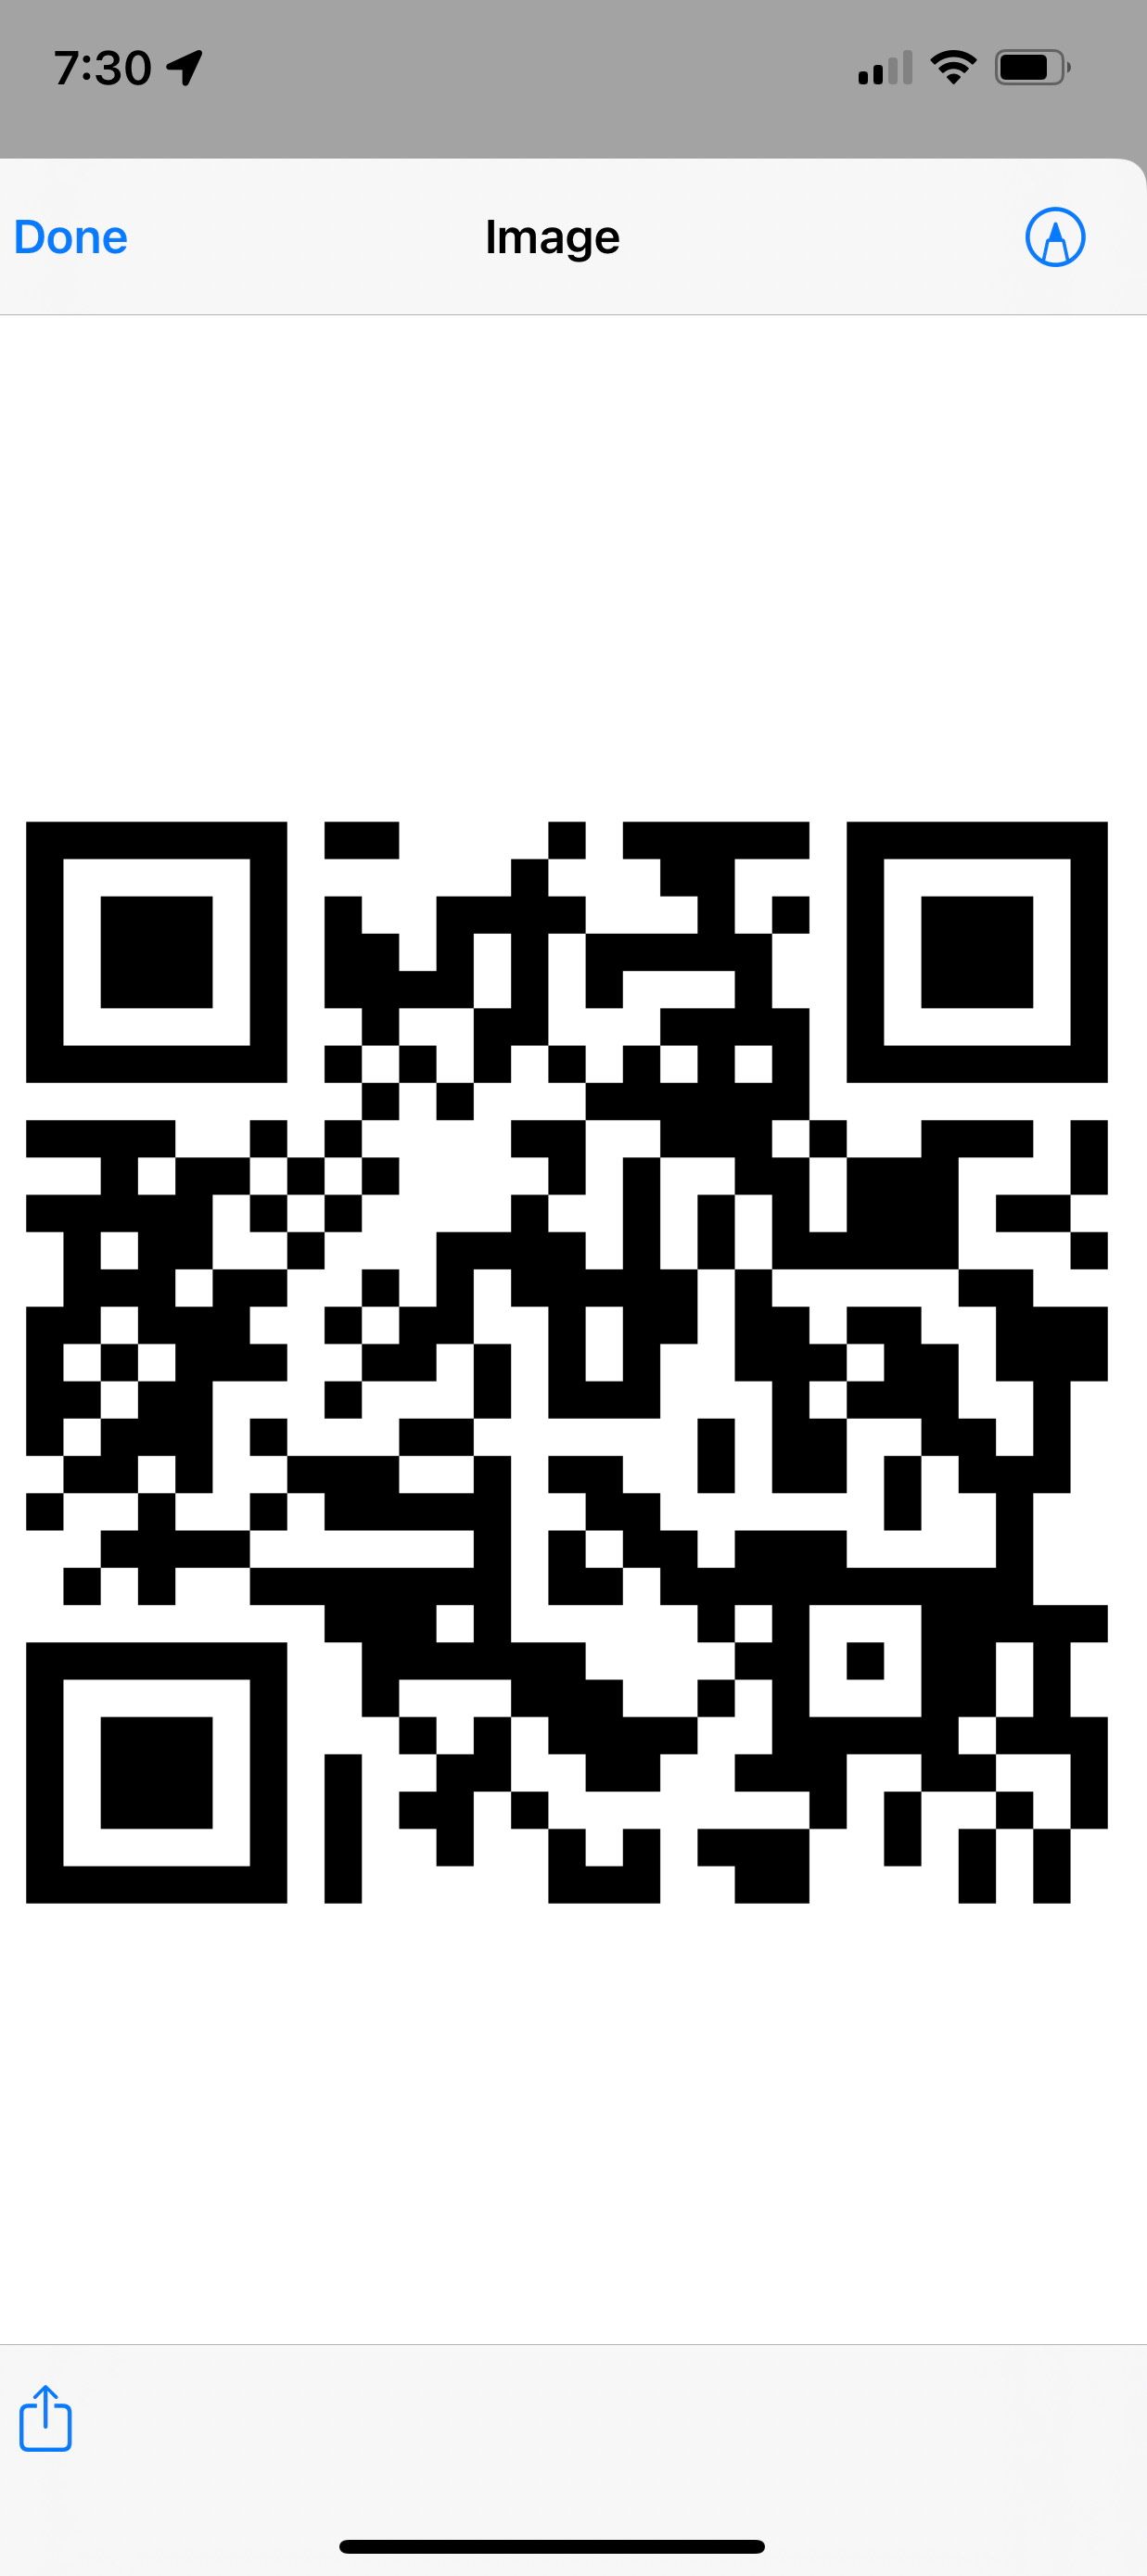 share wifi QR code that allows you to connect to the network